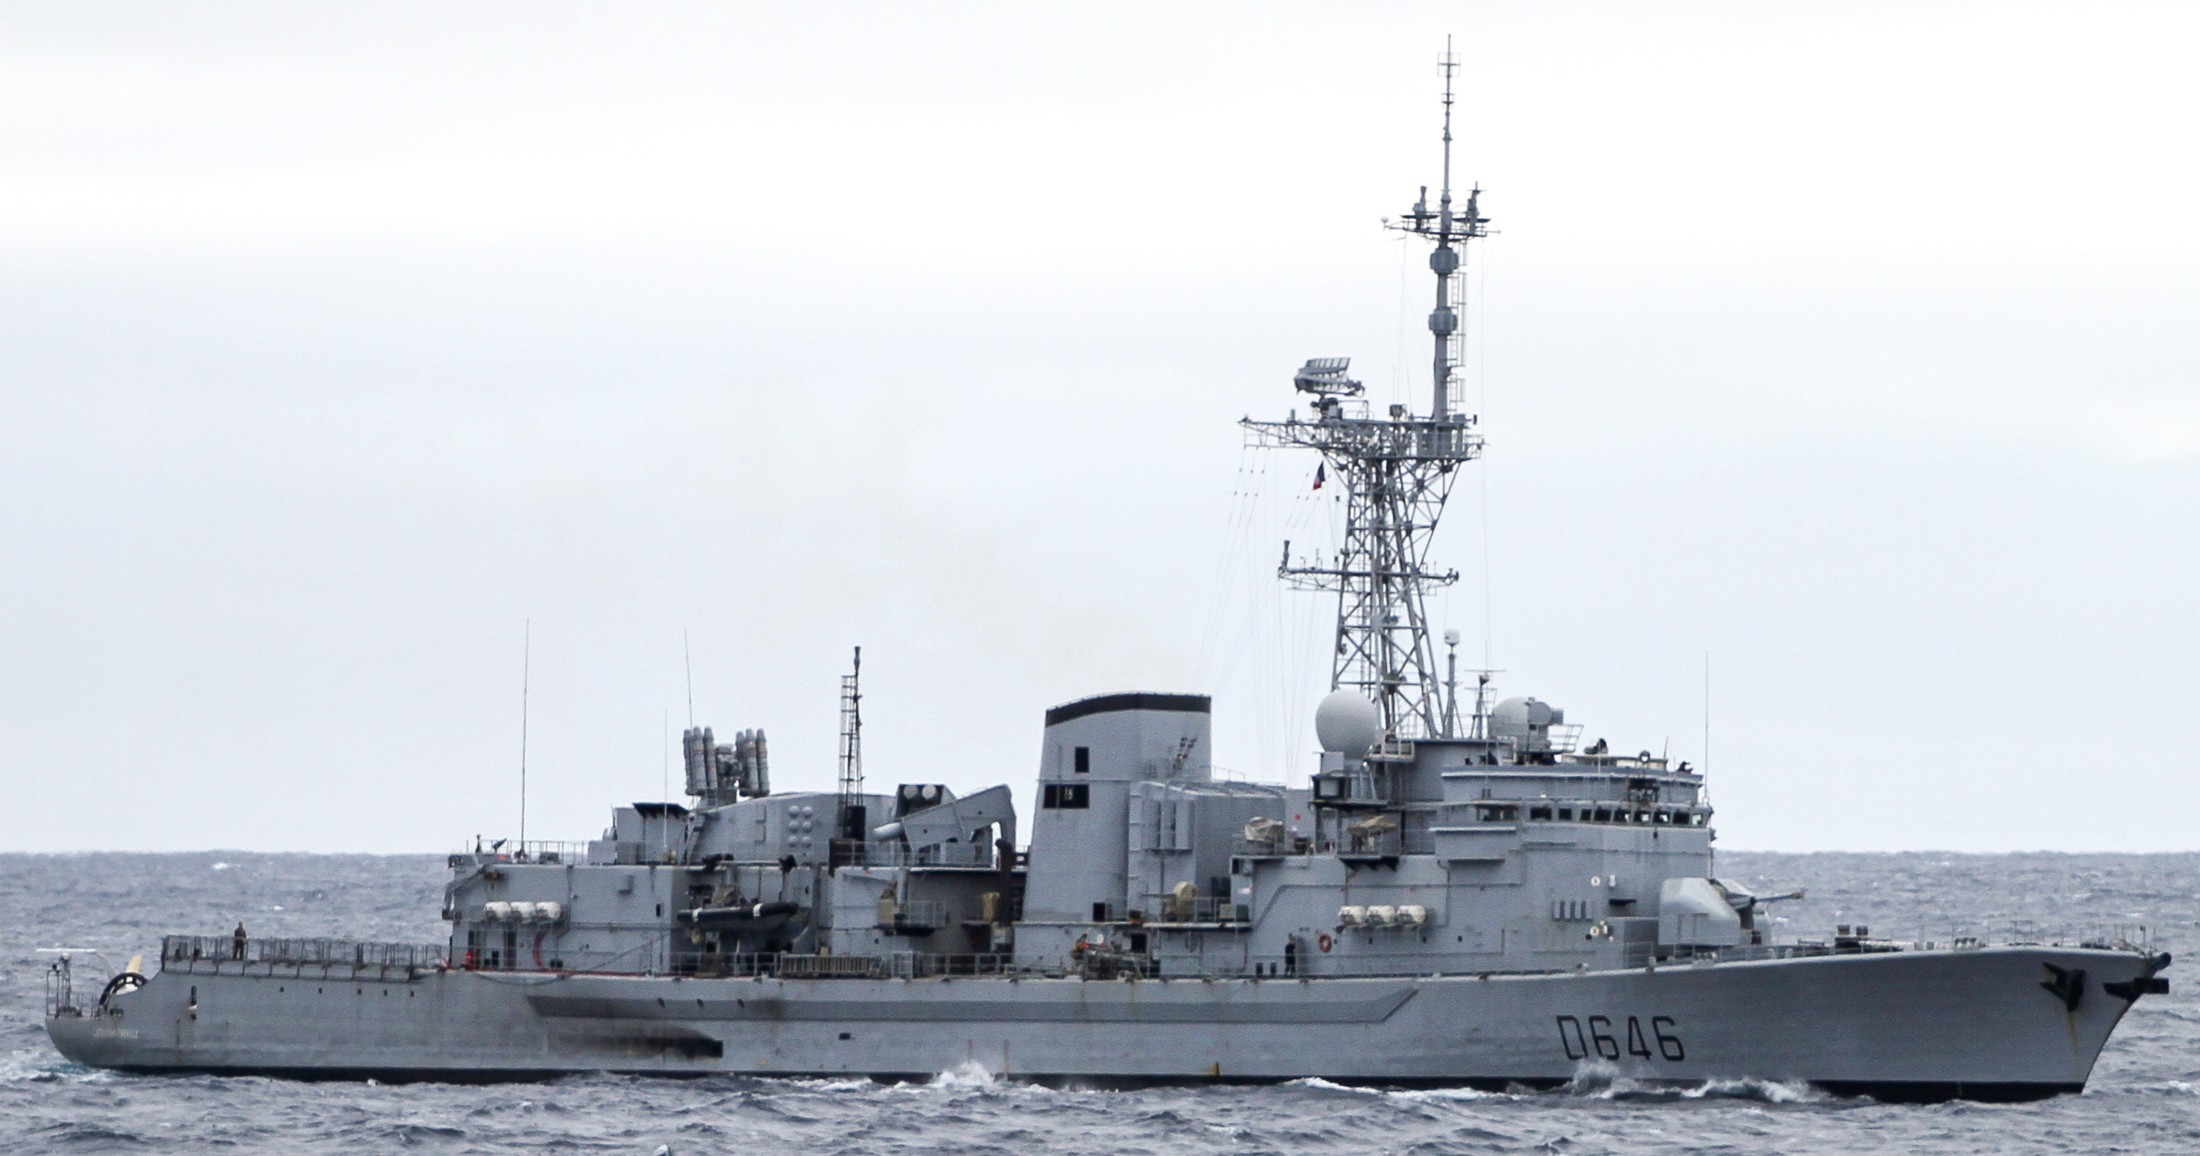 d-646 fs latouche treville f70as frigate destroyer asw french navy marine nationale 32